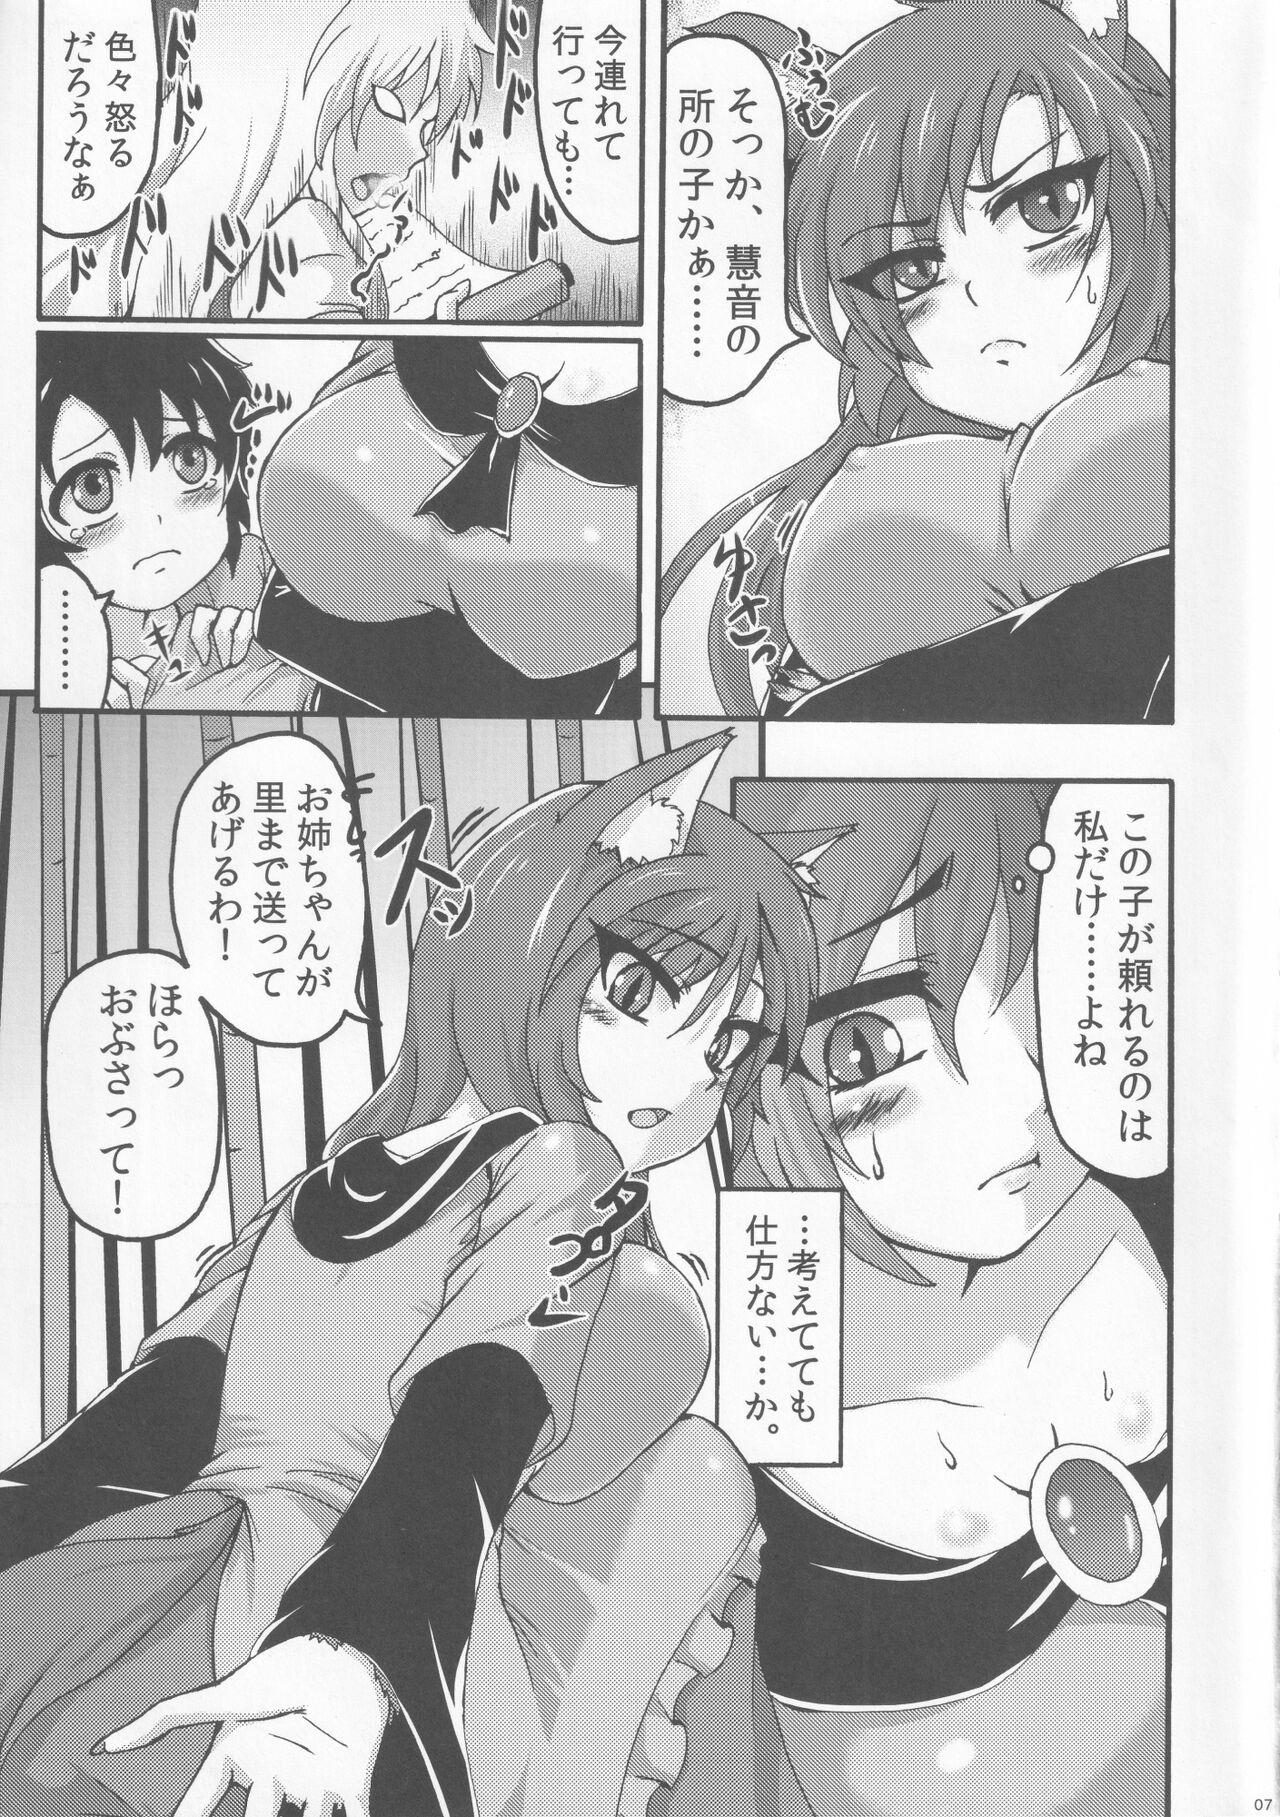 Watersports Kagerou Nights - Touhou project Denmark - Page 6